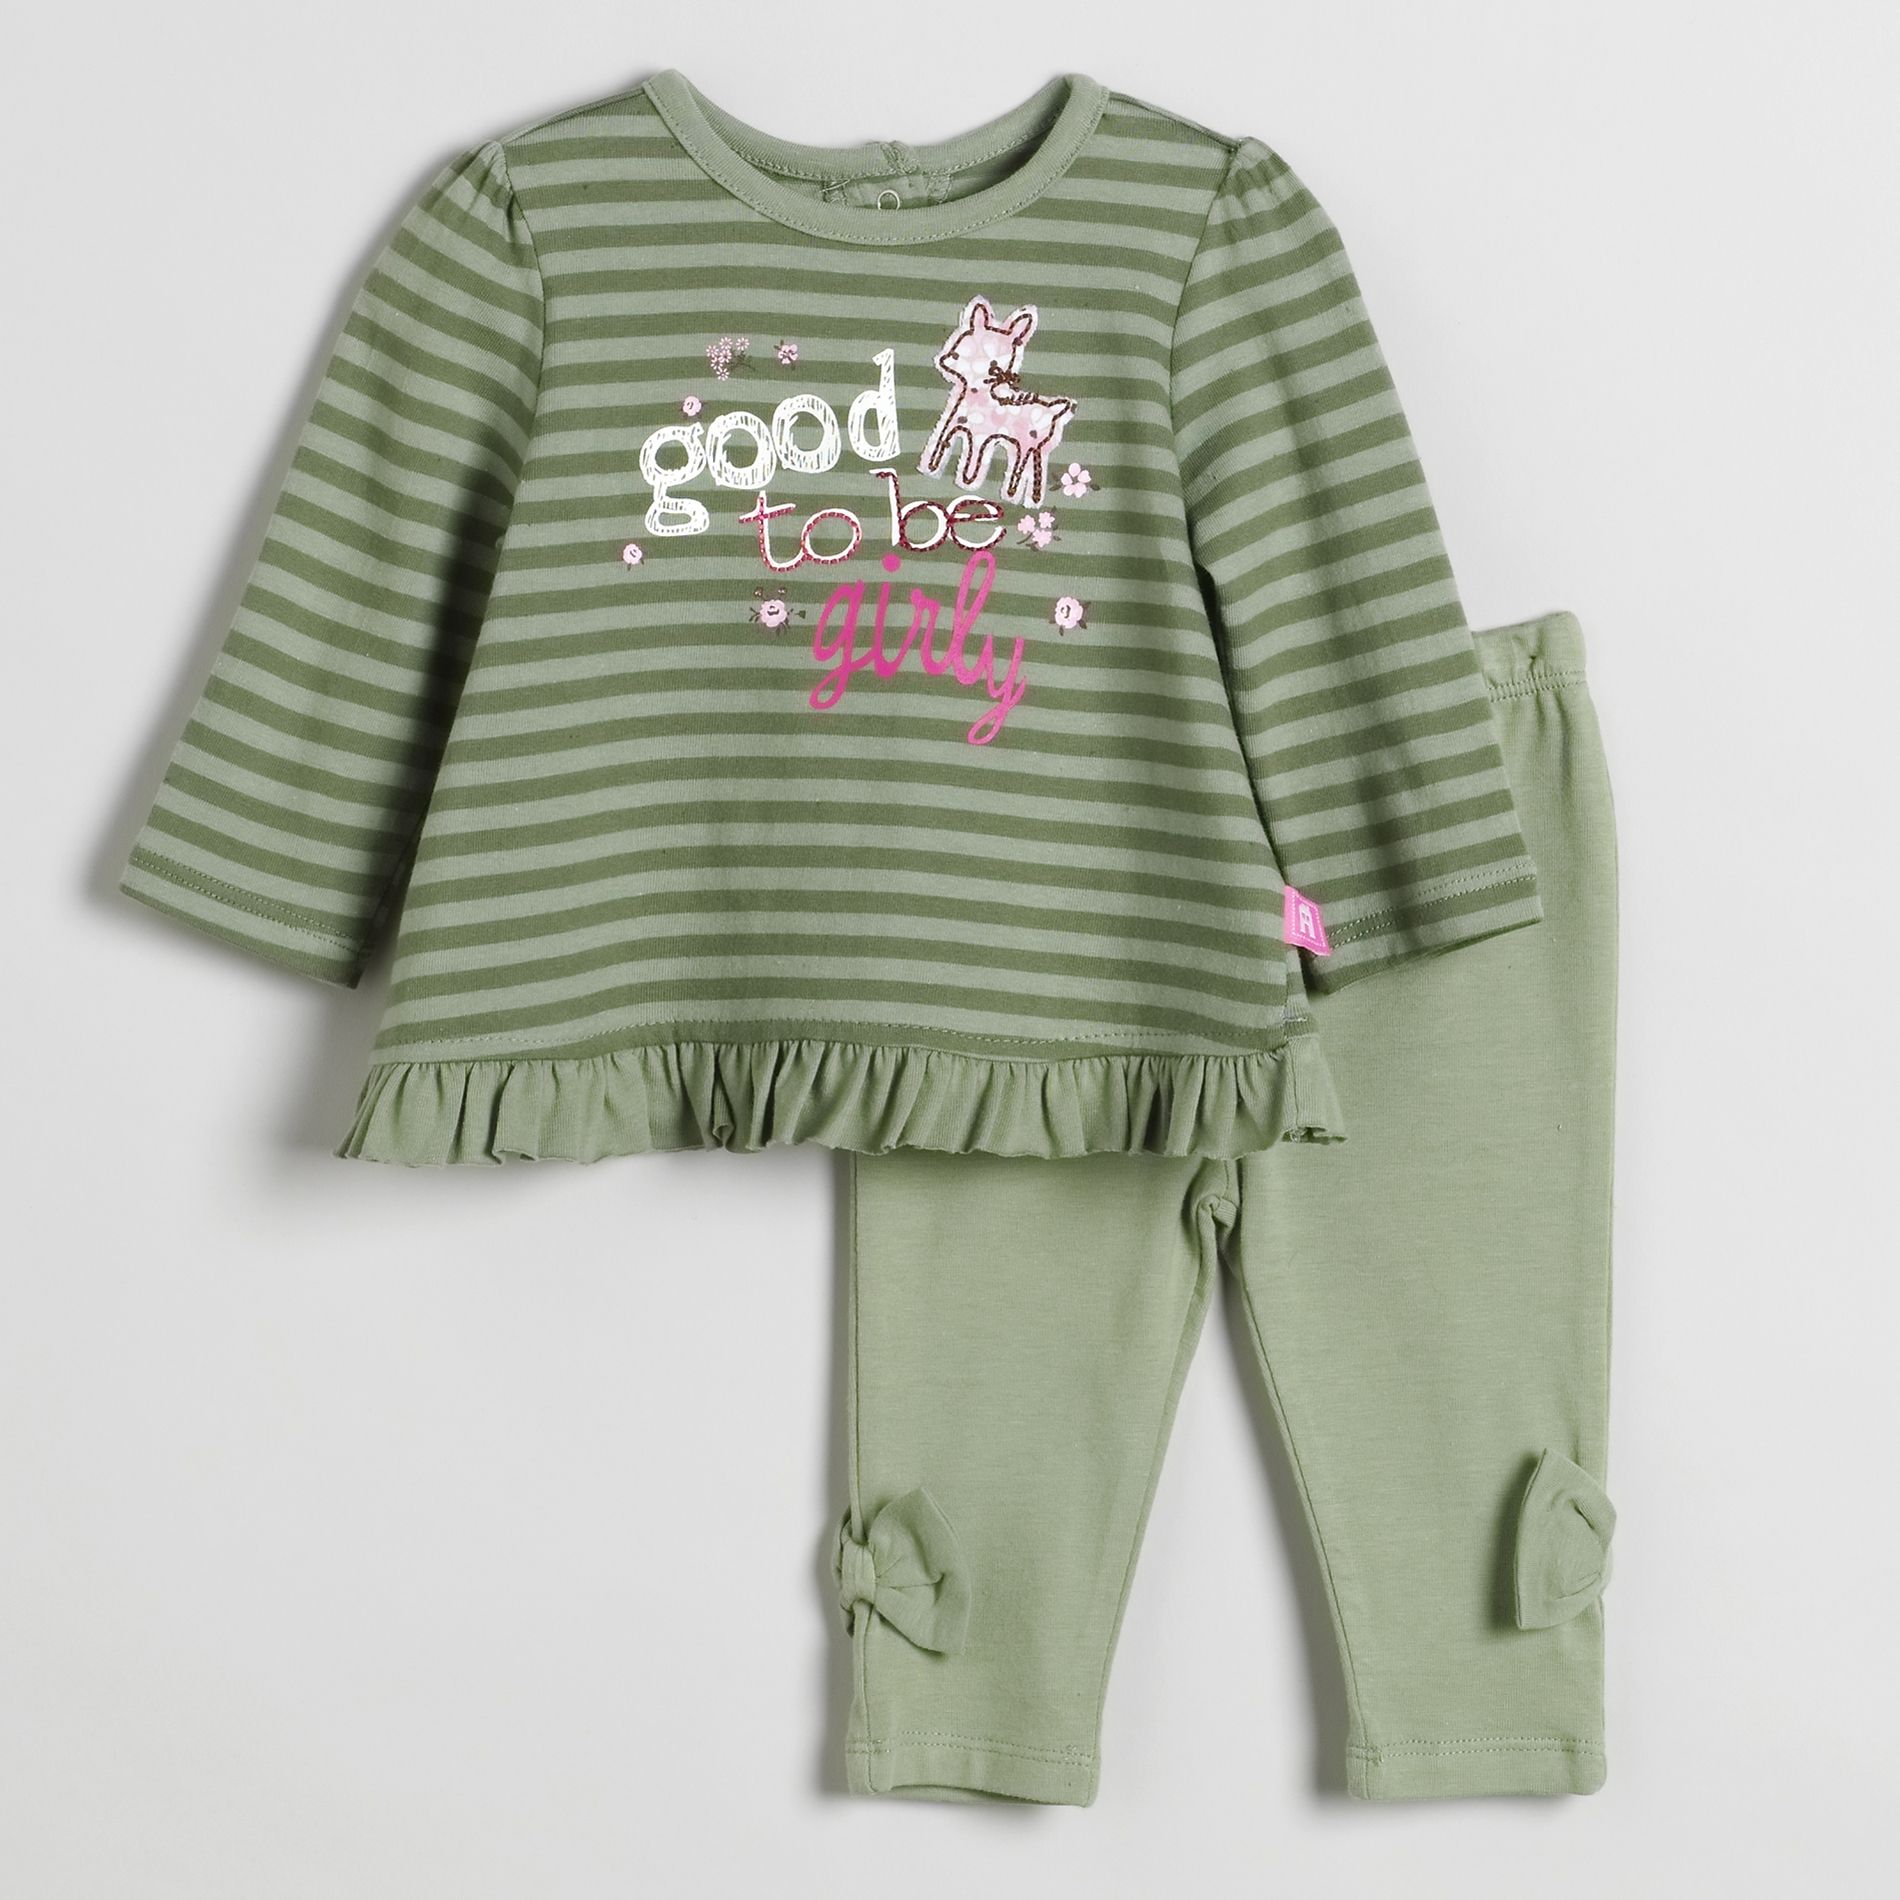 Miniville Infant and Toddler Girls' Knit Pant Set